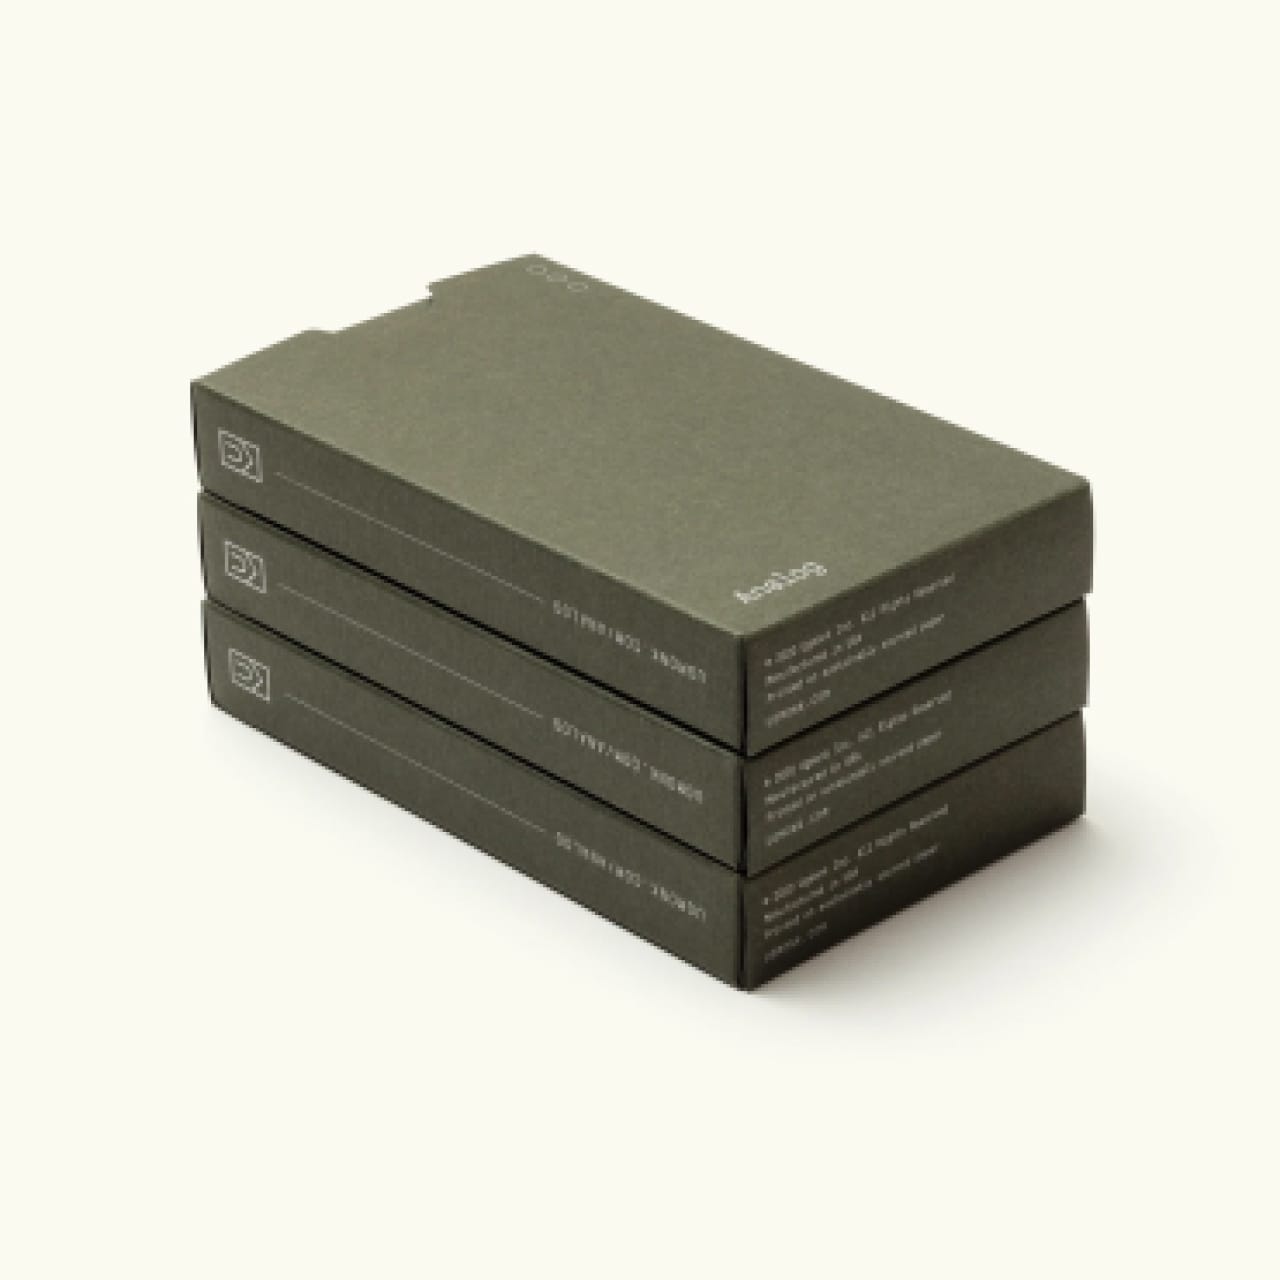 Stack of 3 small drab green cardboard paper card refill boxes with white text.